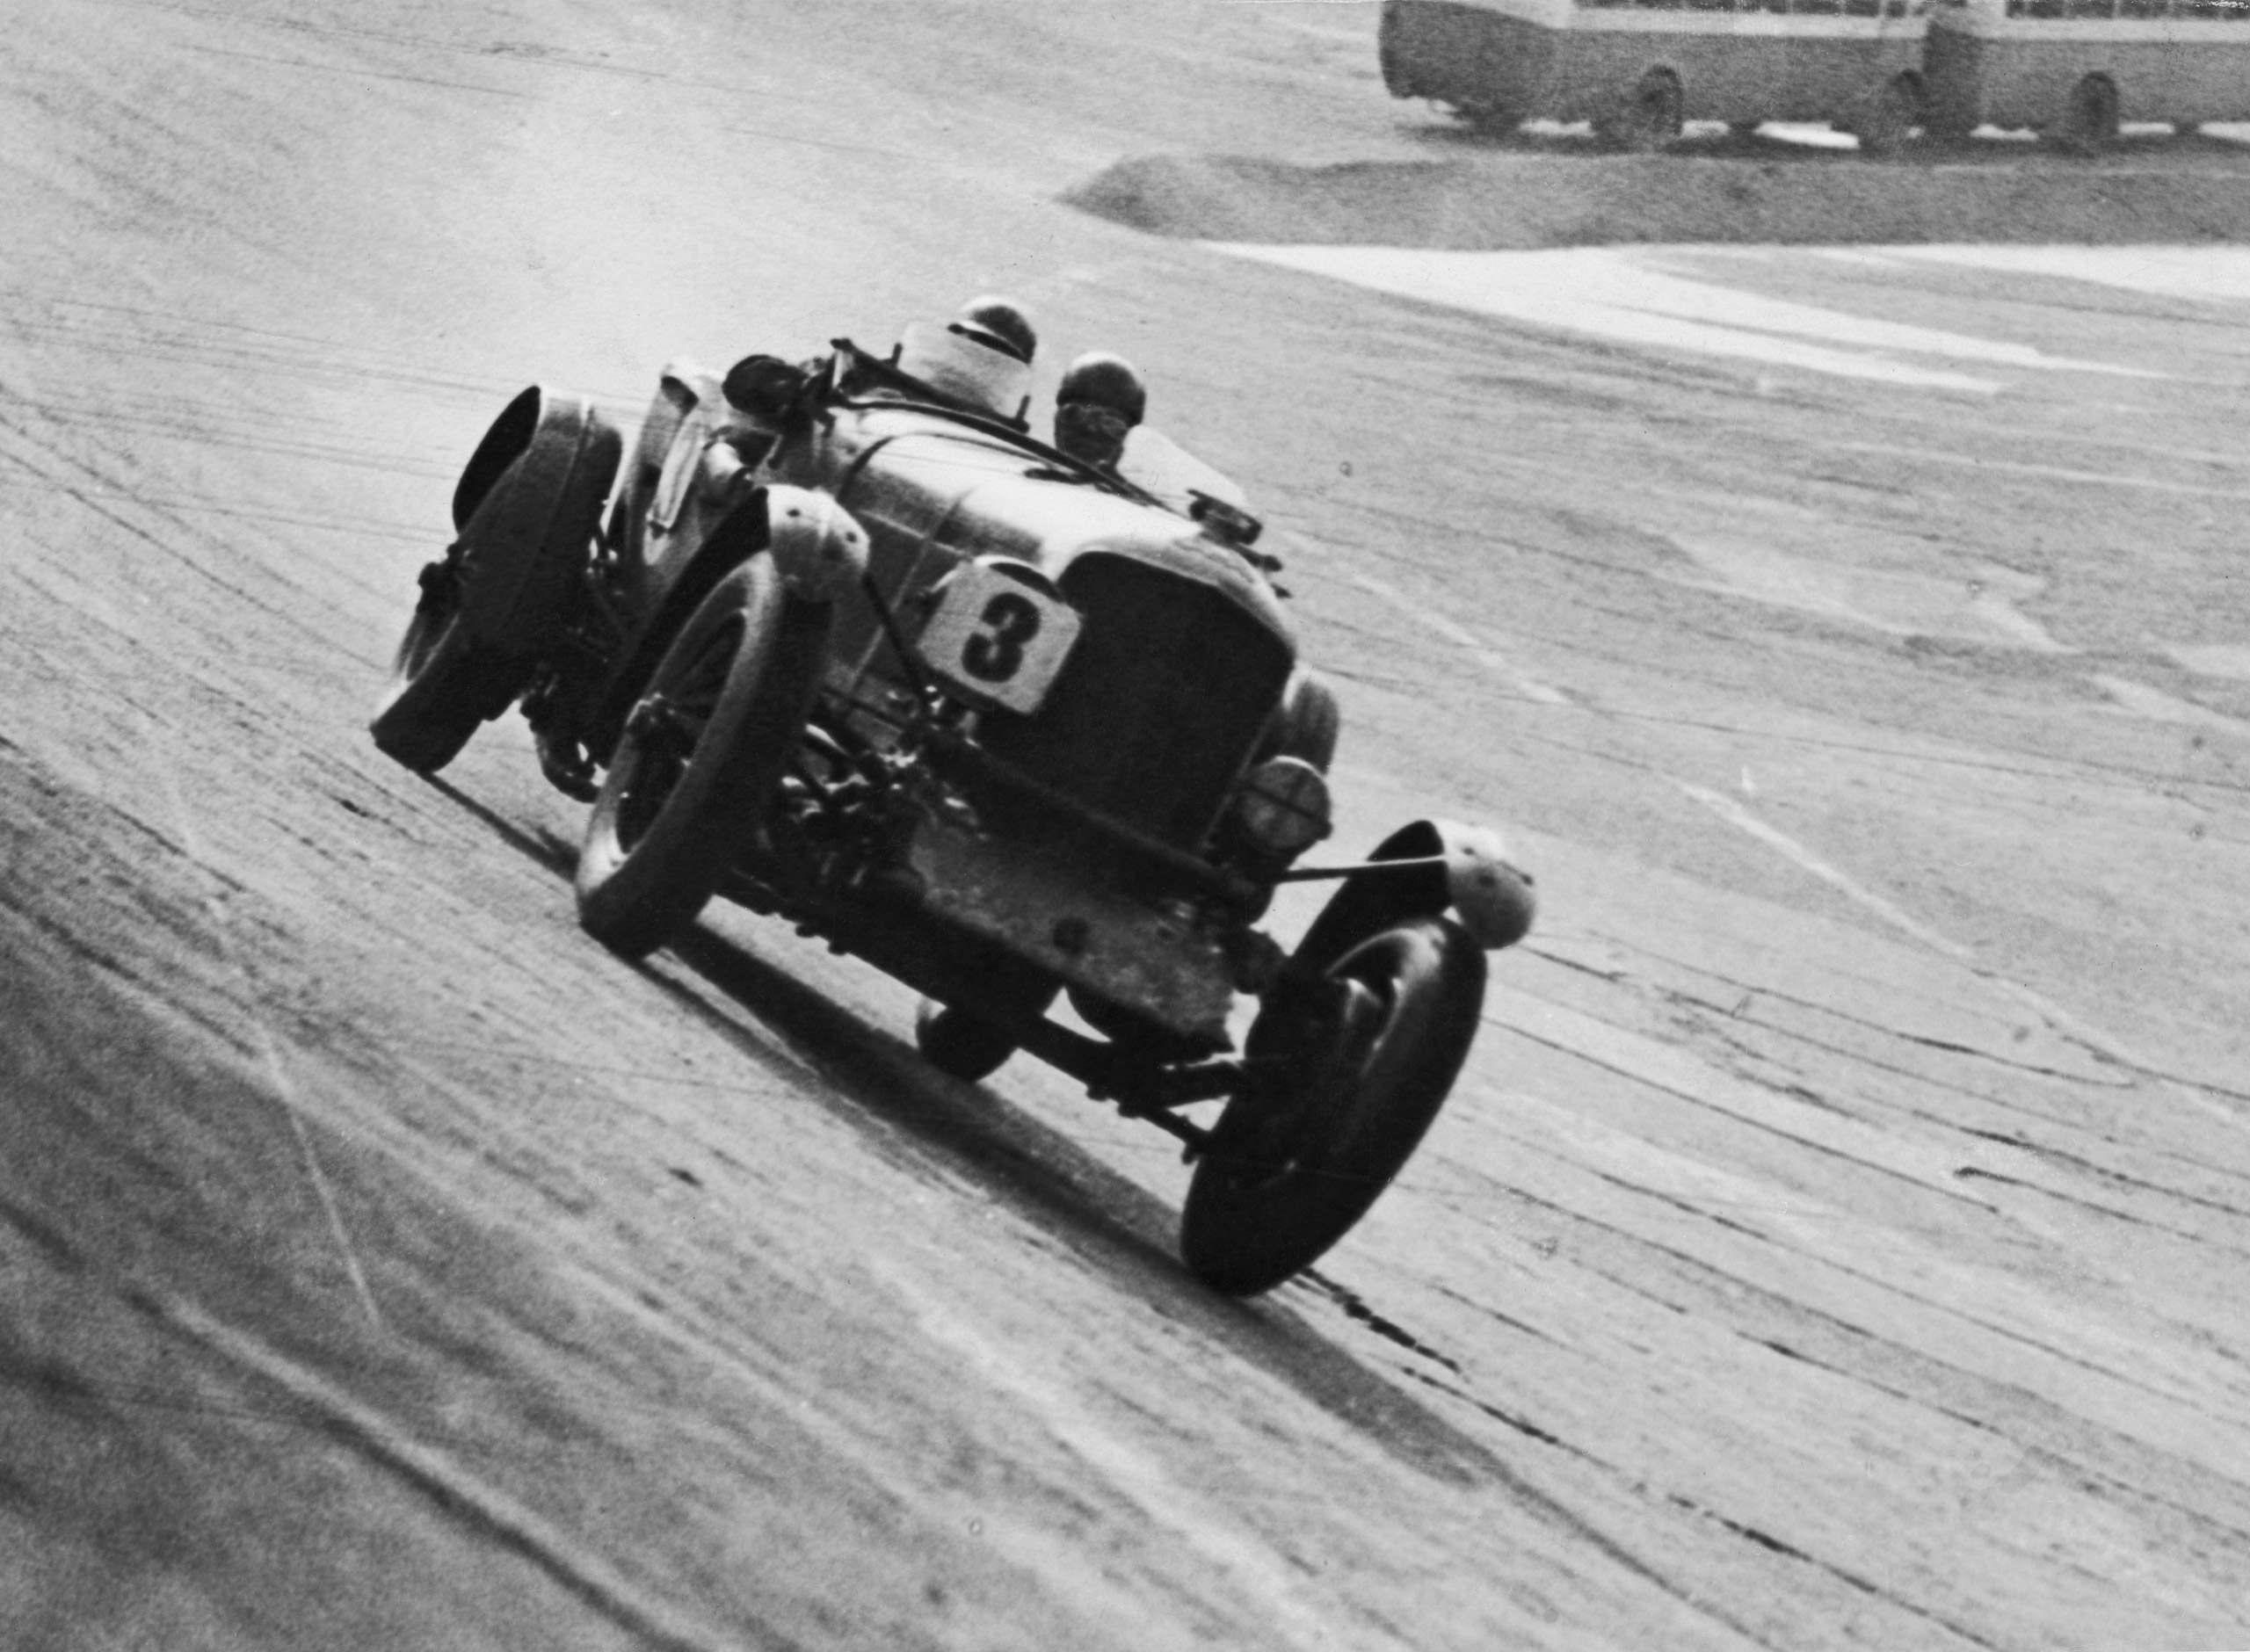 A Bentley Speed Six takes part in the Double Twelve race at Brooklands, circa 1929.